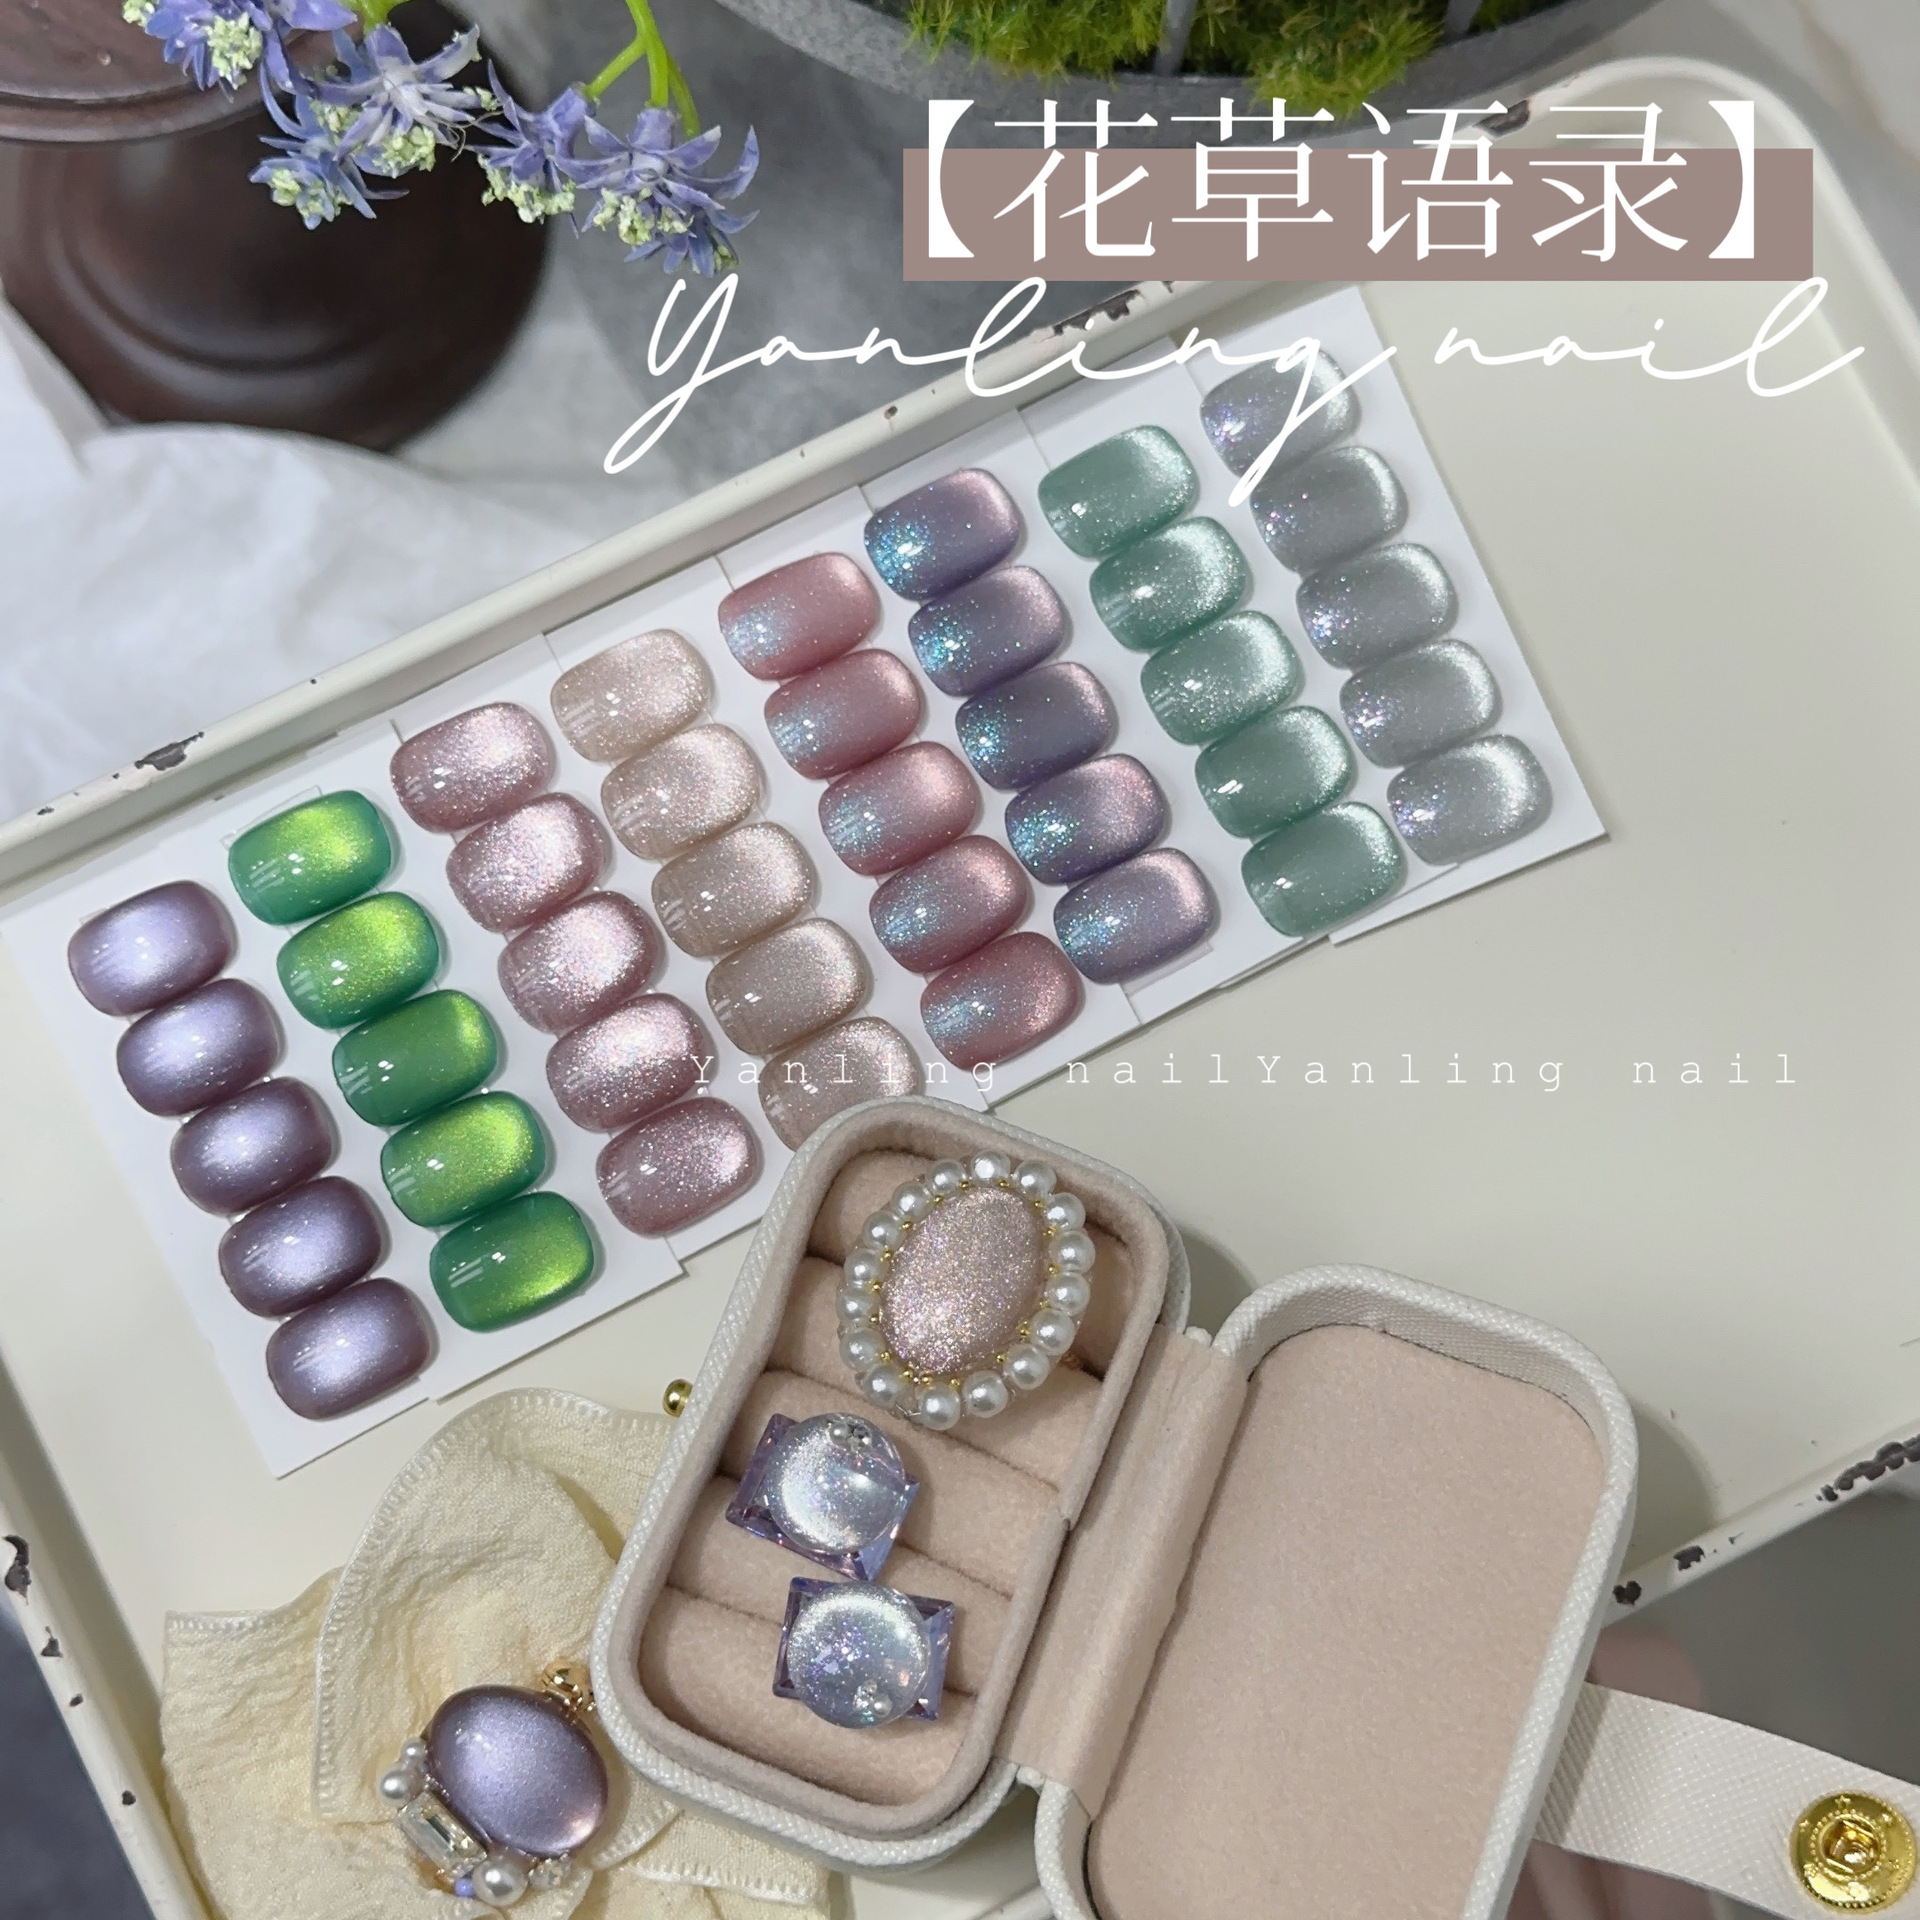 Yanling Flowers and Plants Quotation Series Green Crystal Cat Eye Series Nail Polish Gel Polarized Xiaoye Deli Nail Sequins Pepper Cat's Eye